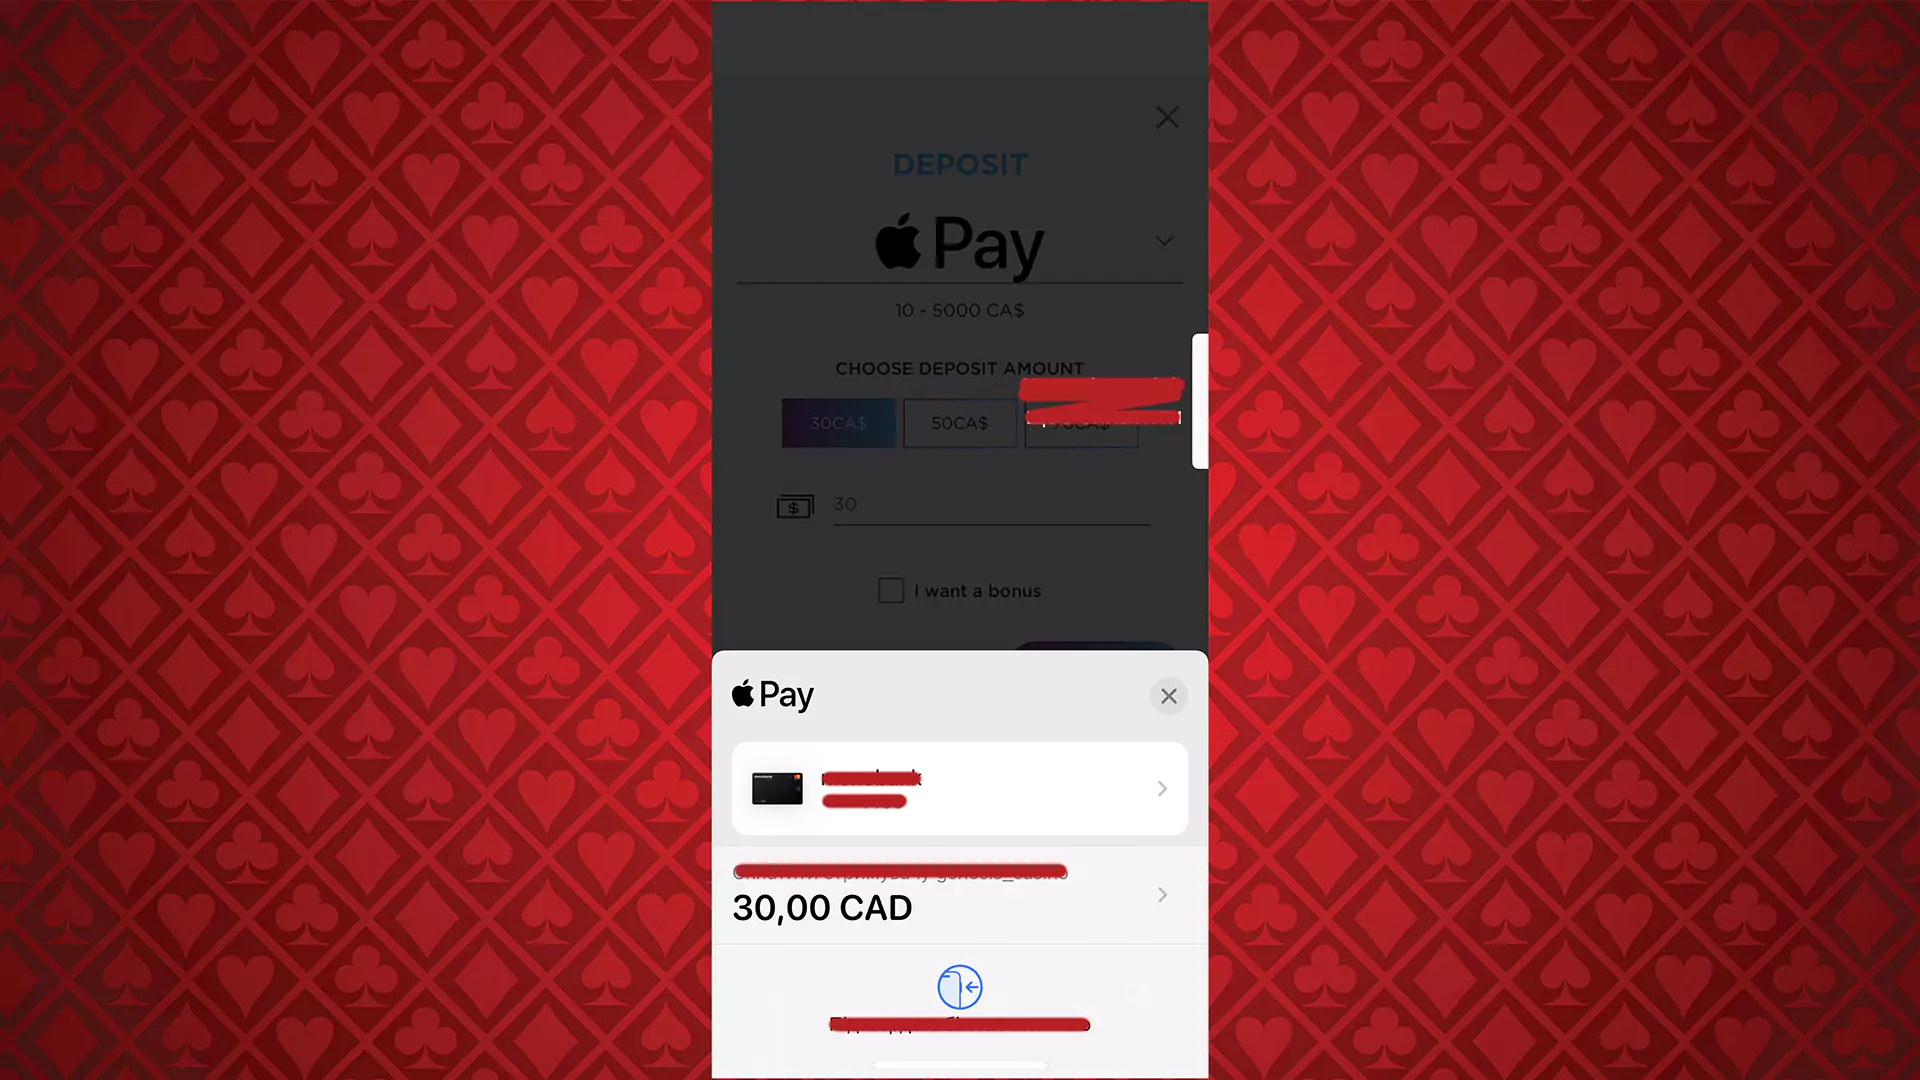 Step 6 - Confirm payment